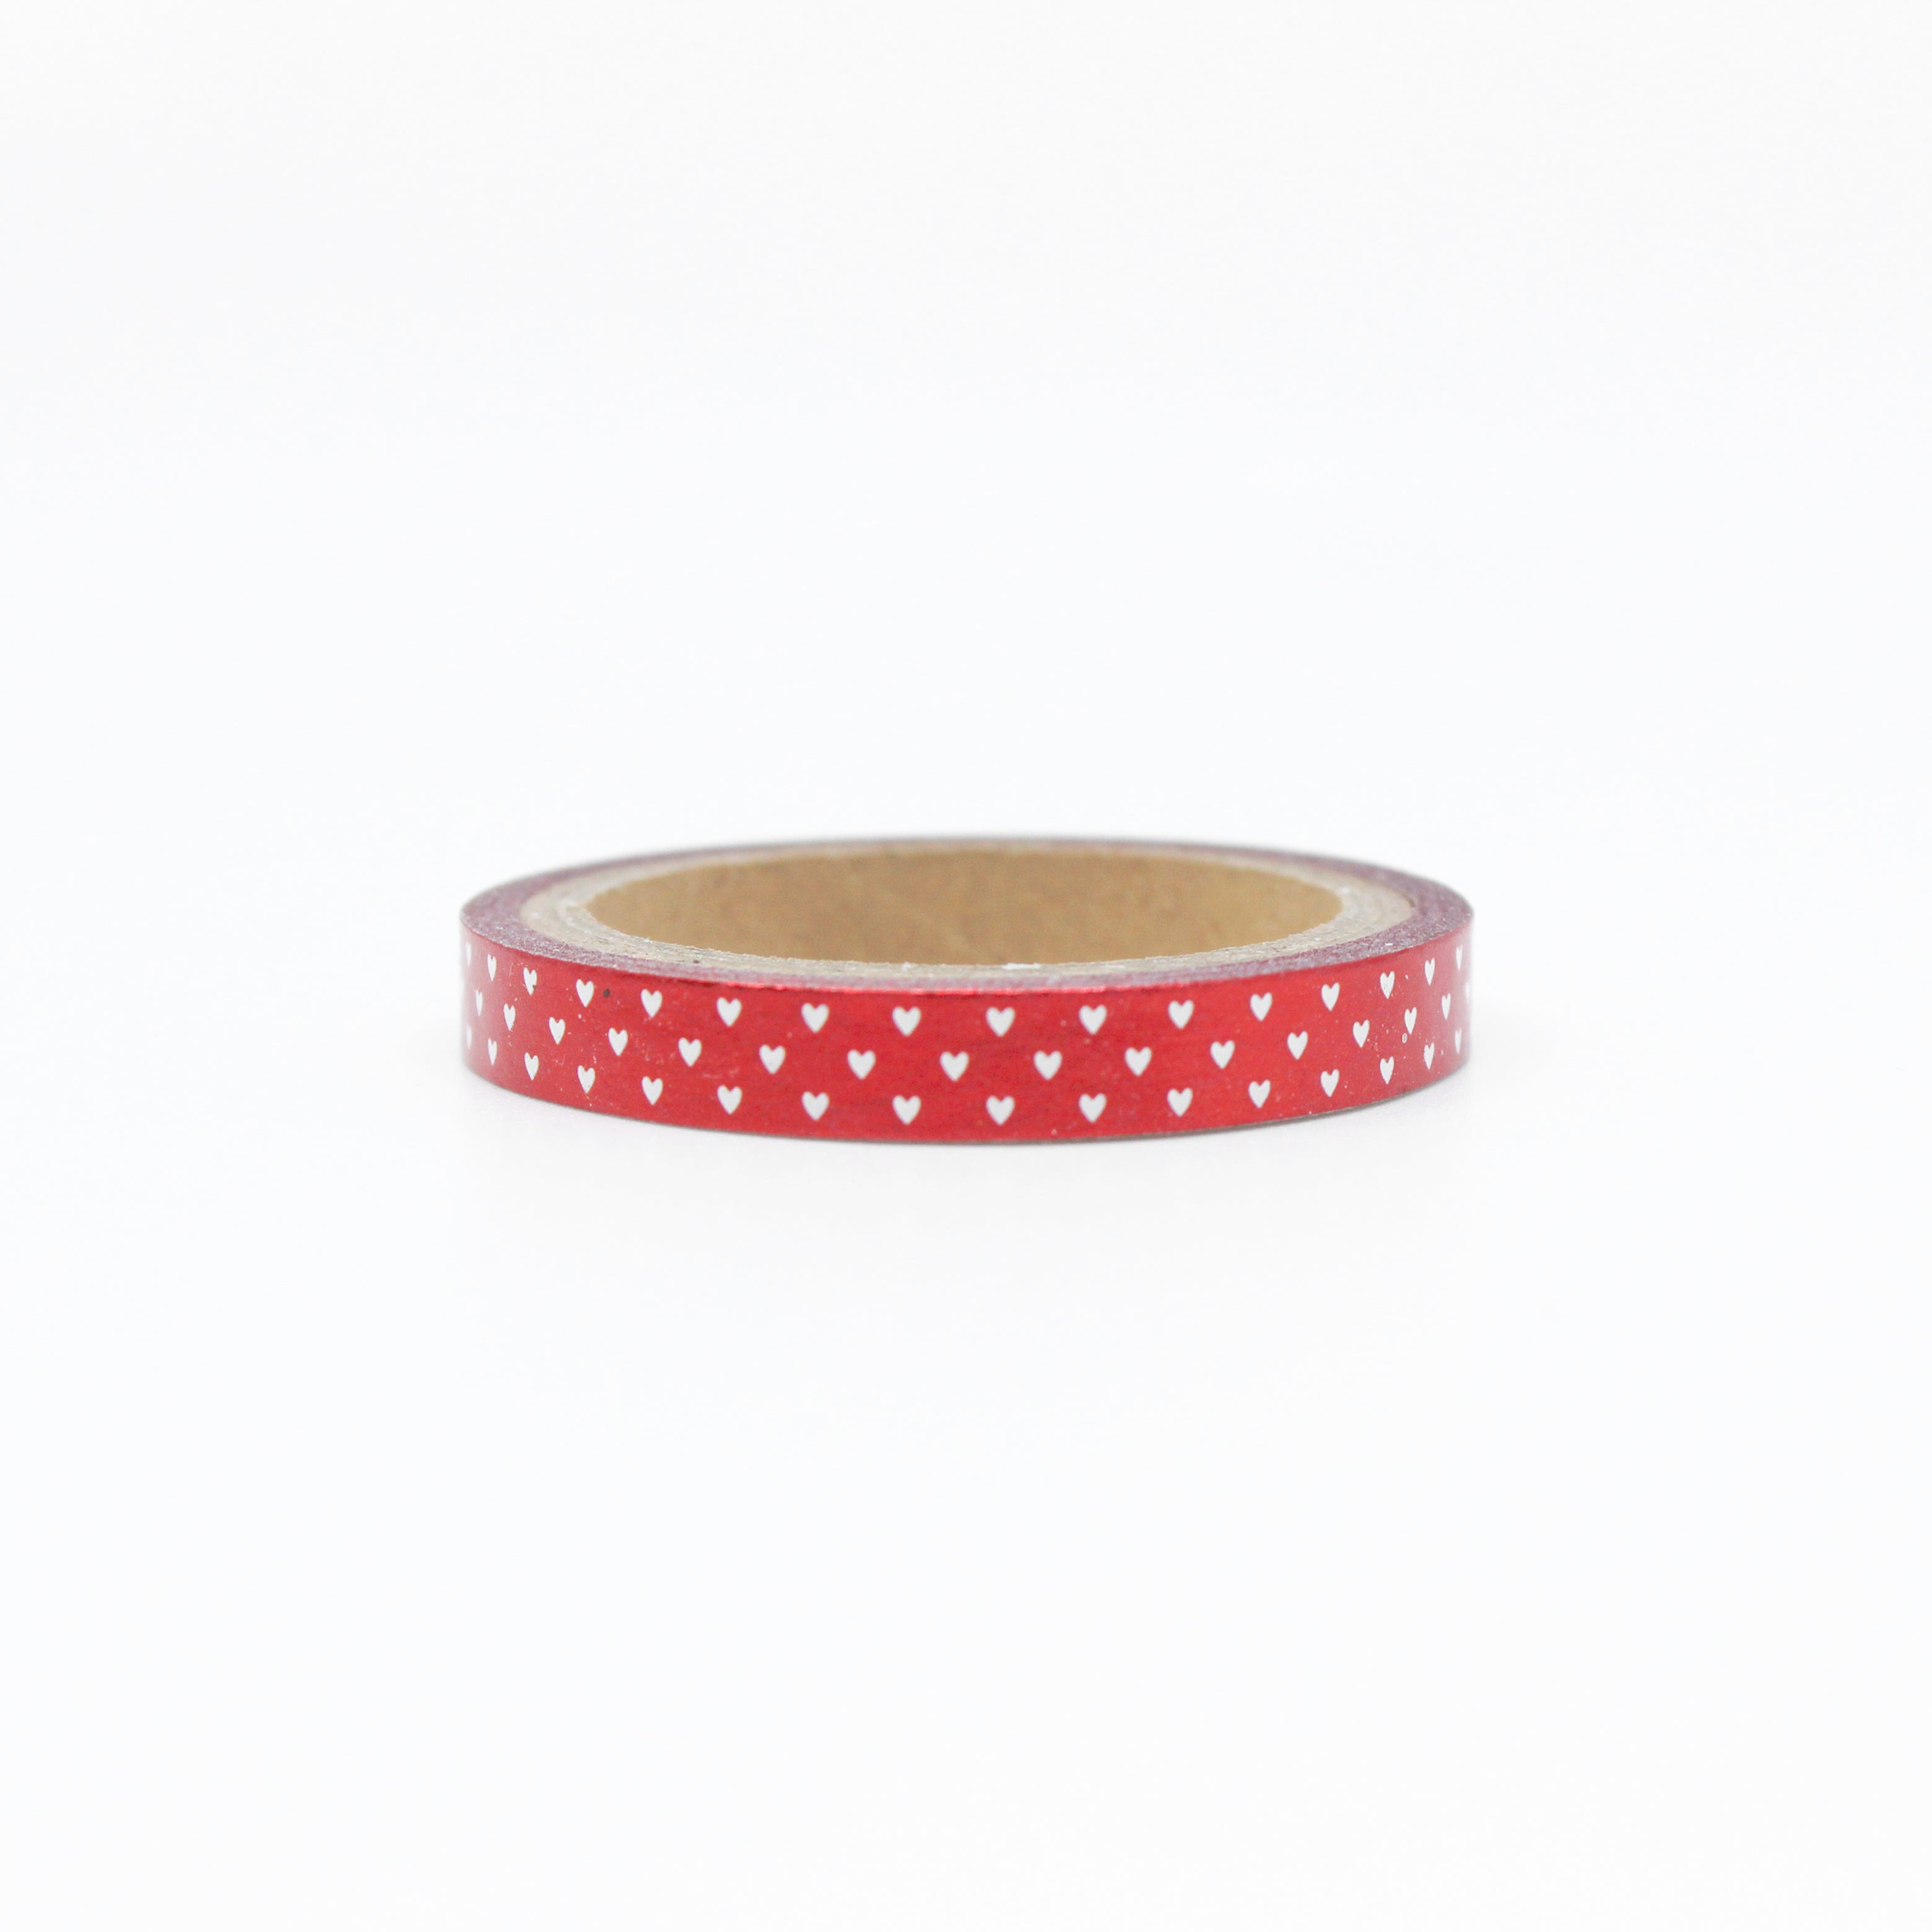 This is a cute red foil with small hearts themed view of washi tape from BBB Supplies Craft Shop